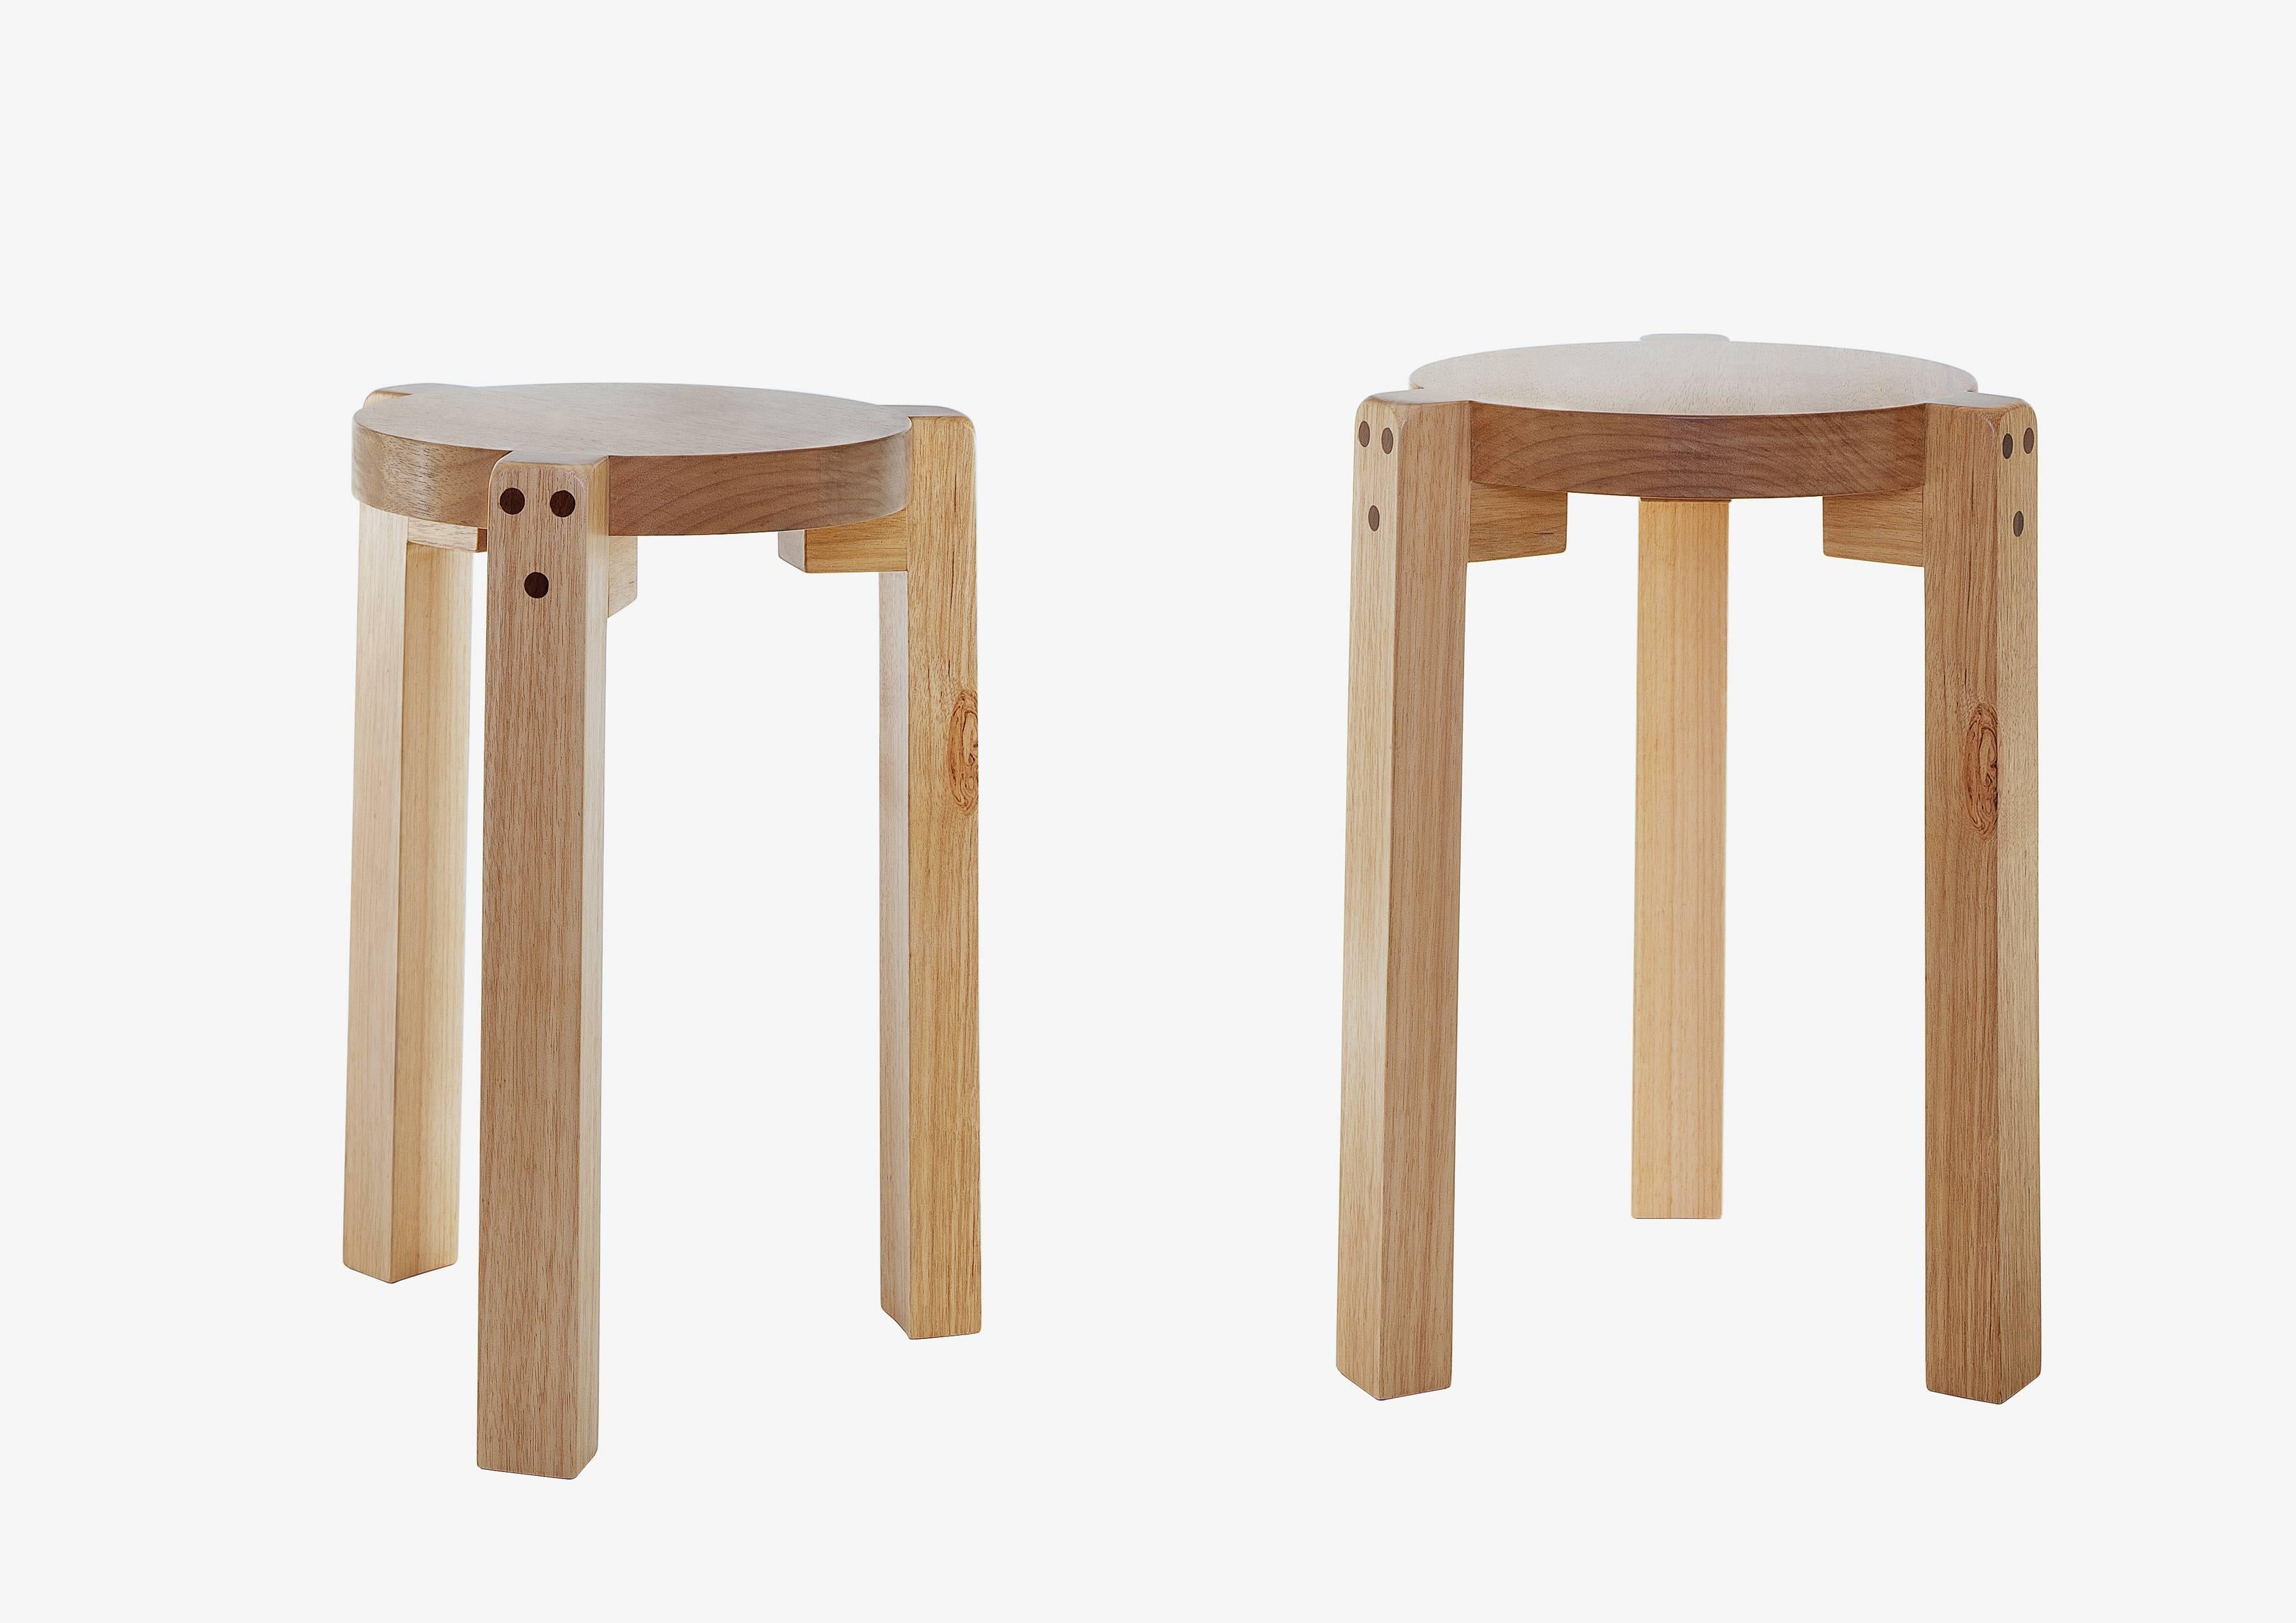 The Girafa stool is part of the Girafa furniture family, designed in 1986 by Marcelo Ferraz, Marcelo Suzuki and Lina Bo Bardi and is an icon of Brazilian modern design.
Due to its unique shapes, in 2016, the Girafa was incorporated into the